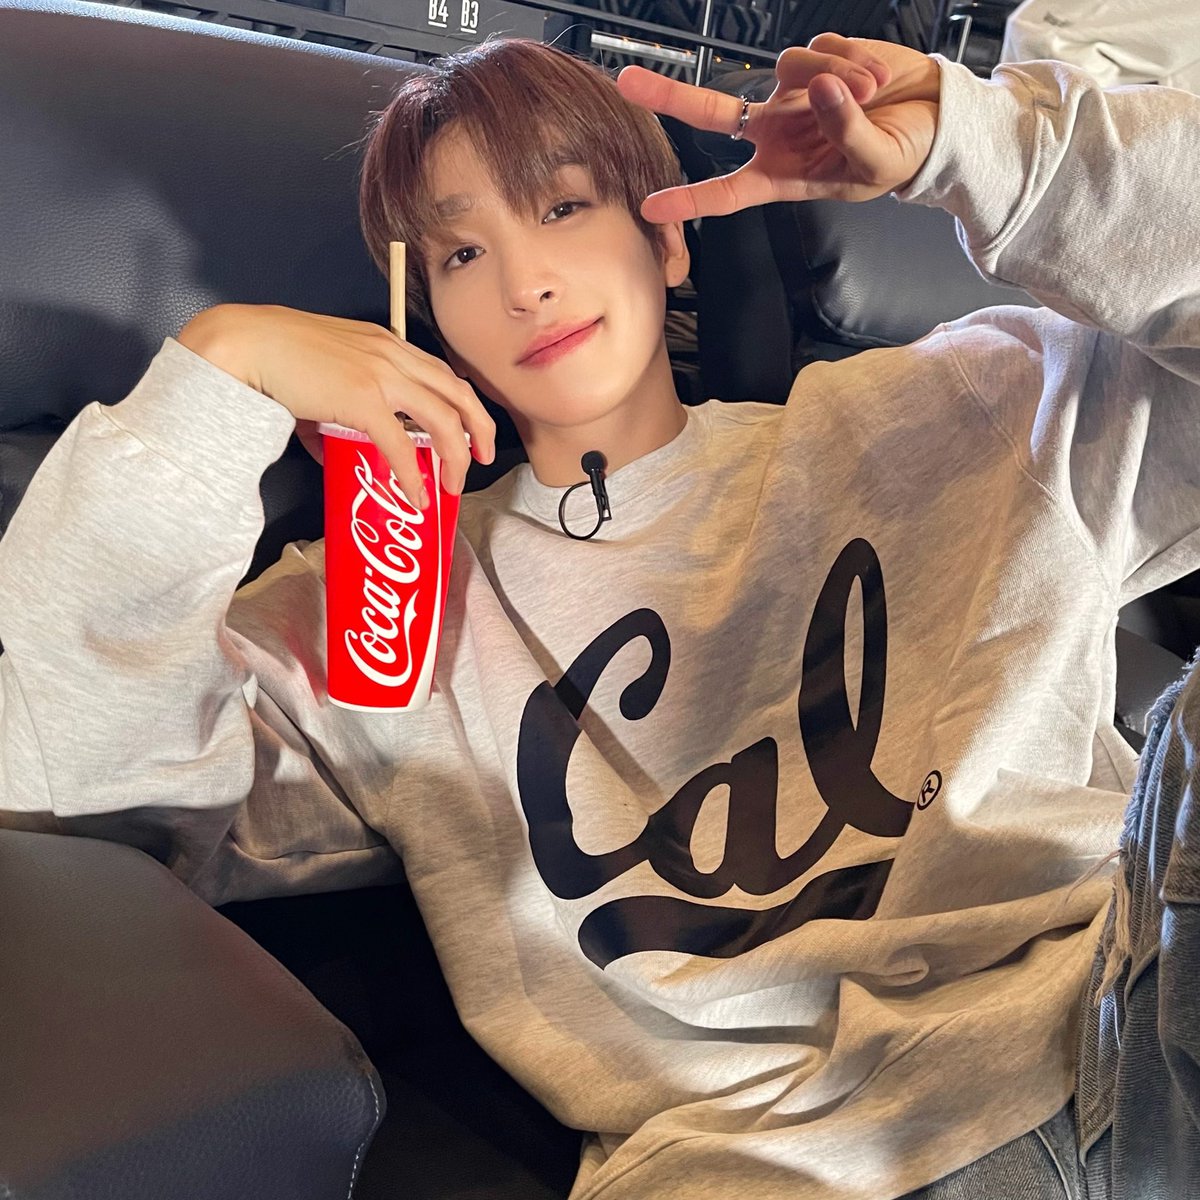 Image for [Sangyeon] Puu~🥤 https://t.